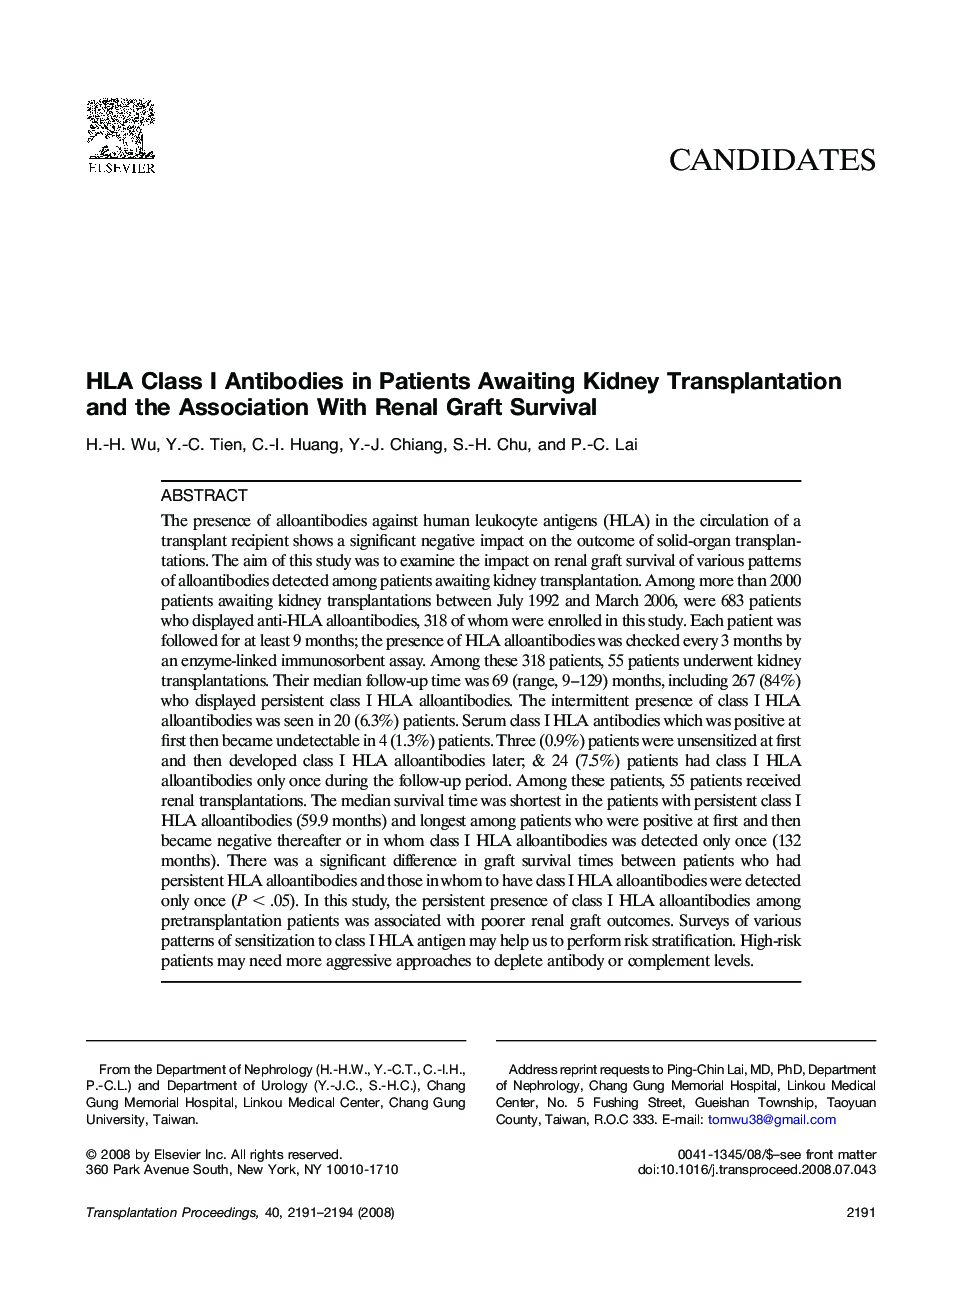 HLA Class I Antibodies in Patients Awaiting Kidney Transplantation and the Association With Renal Graft Survival